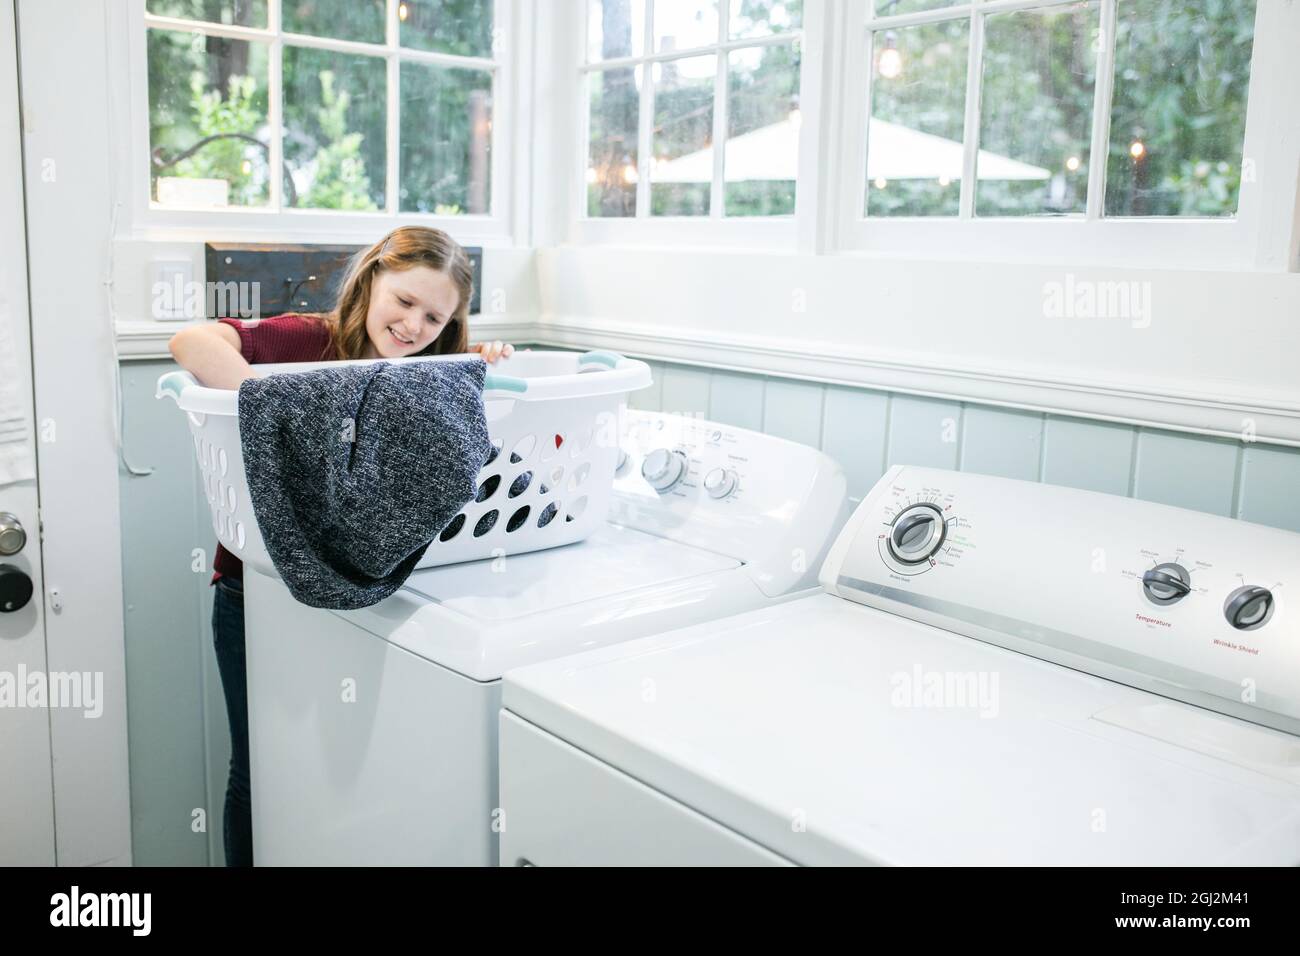 A little girl with long hair and freckles holding a laundry basket and doing the wash as laundry chores in a natural light laundry room with a washer Stock Photo